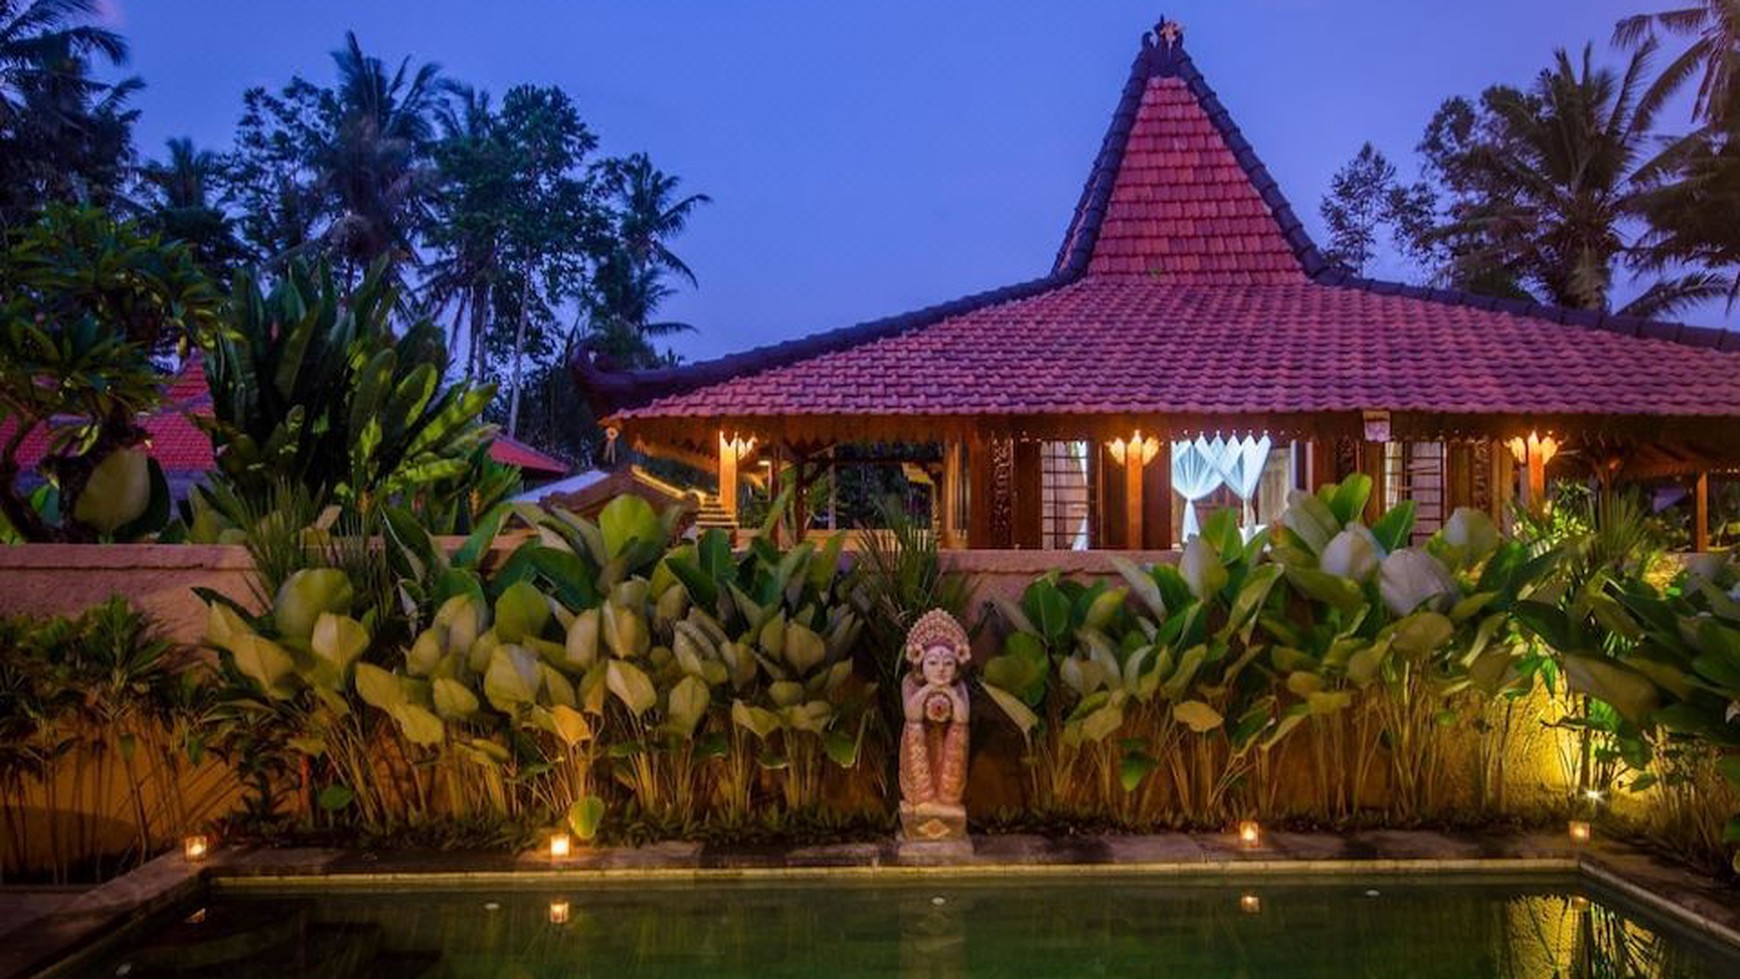 Beautiful 3 Bedroom Boutique Hotel  For Rent on 972sqm of Freehold Land 13 Minutes from Ubud Center